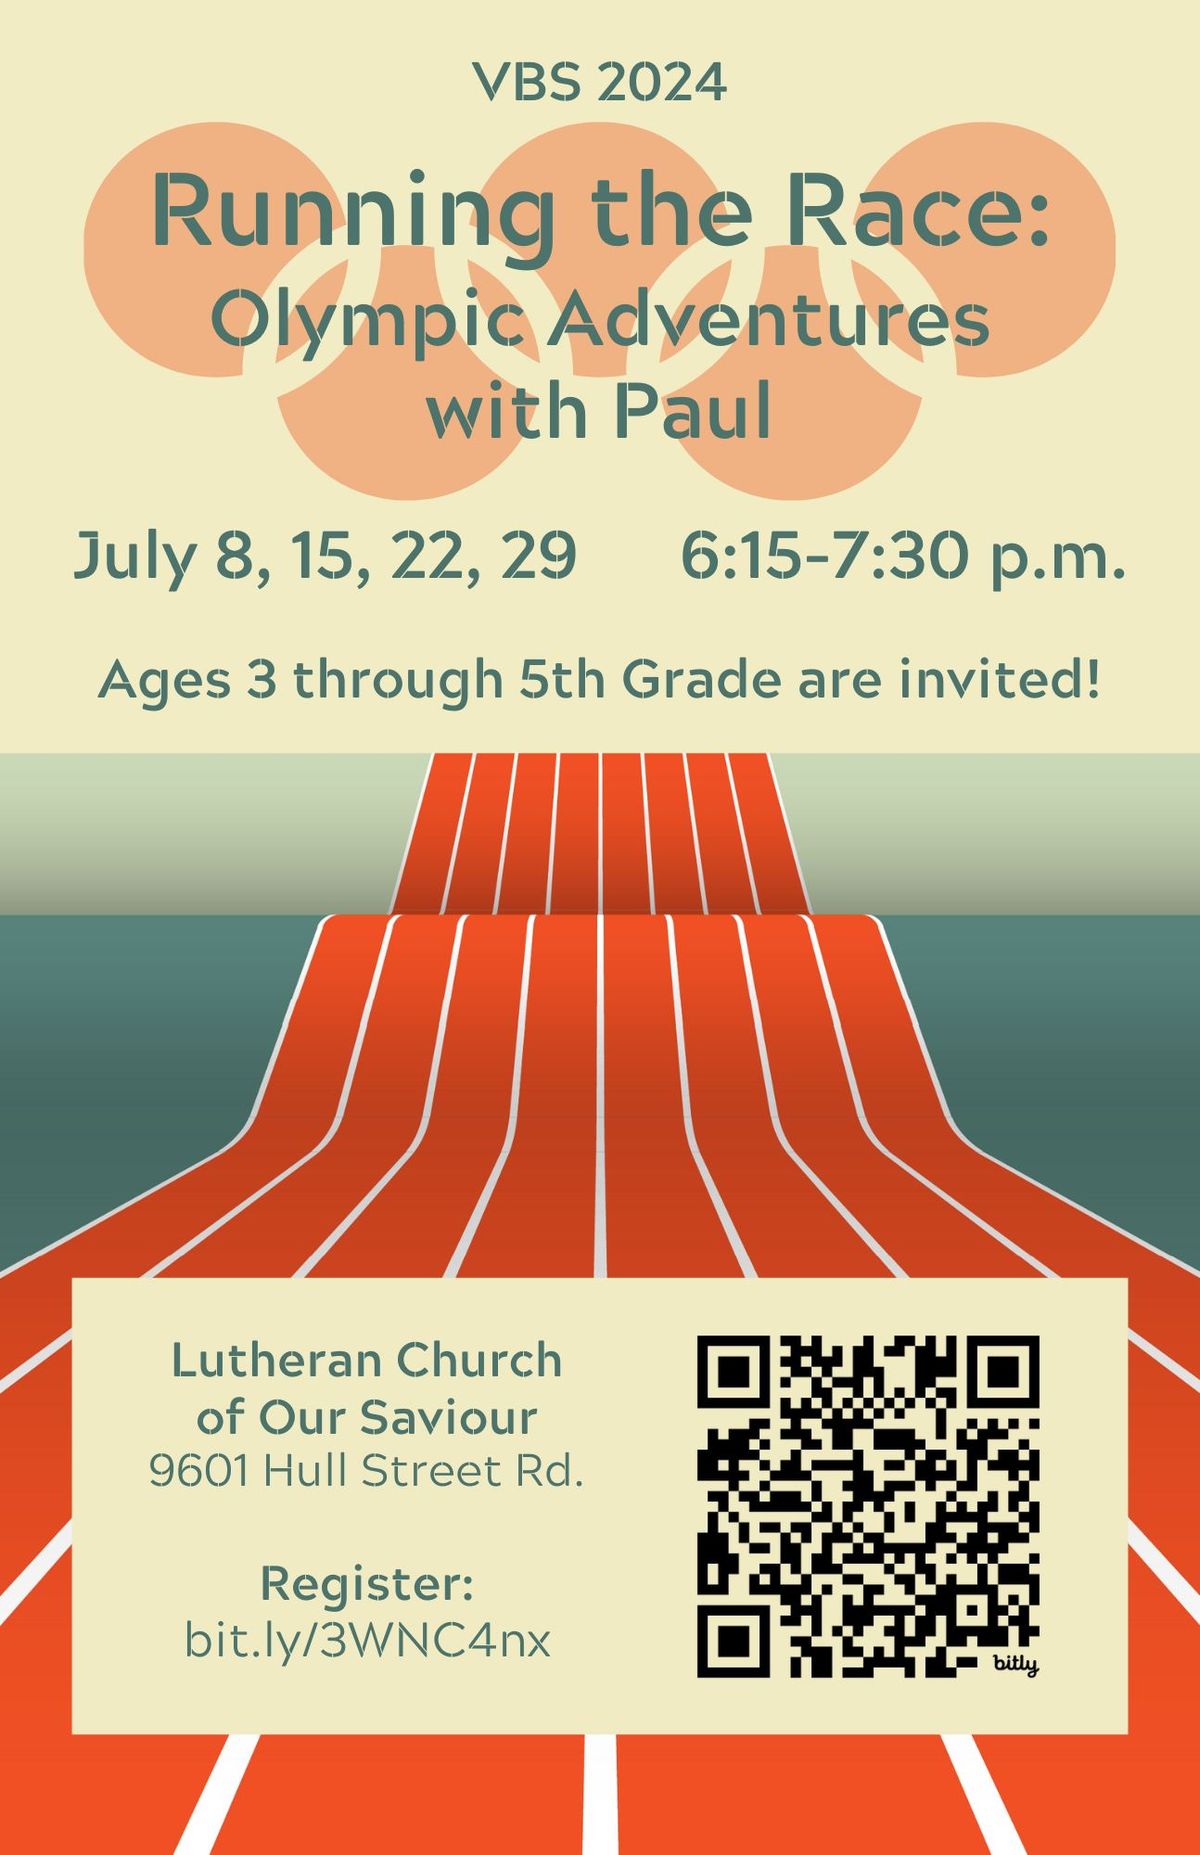 VBS 2024: Running the Race: Olympic Adventures with Paul